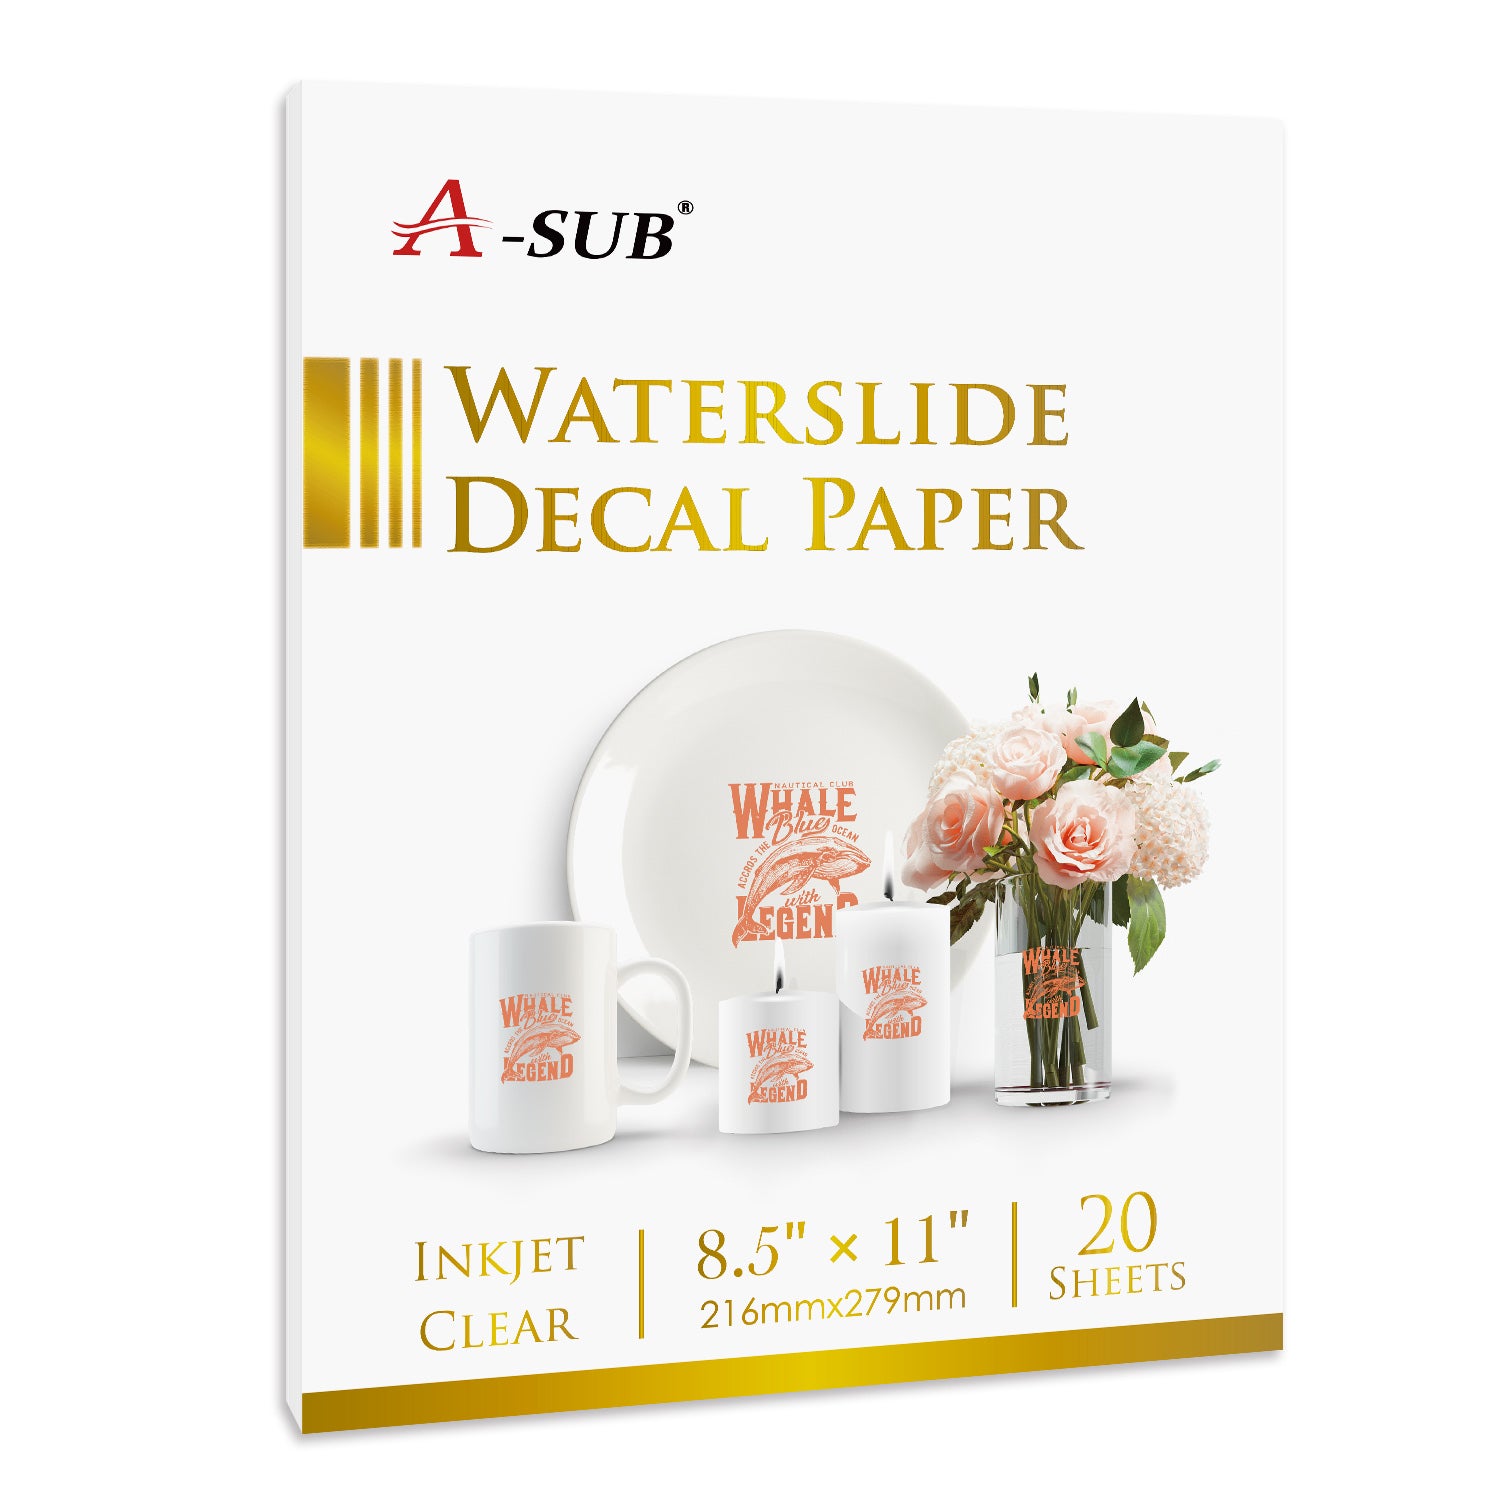 A-SUB Clear Waterslide Decal Paper Clear for Inkjet Printer  20 Sheets  8.5x11